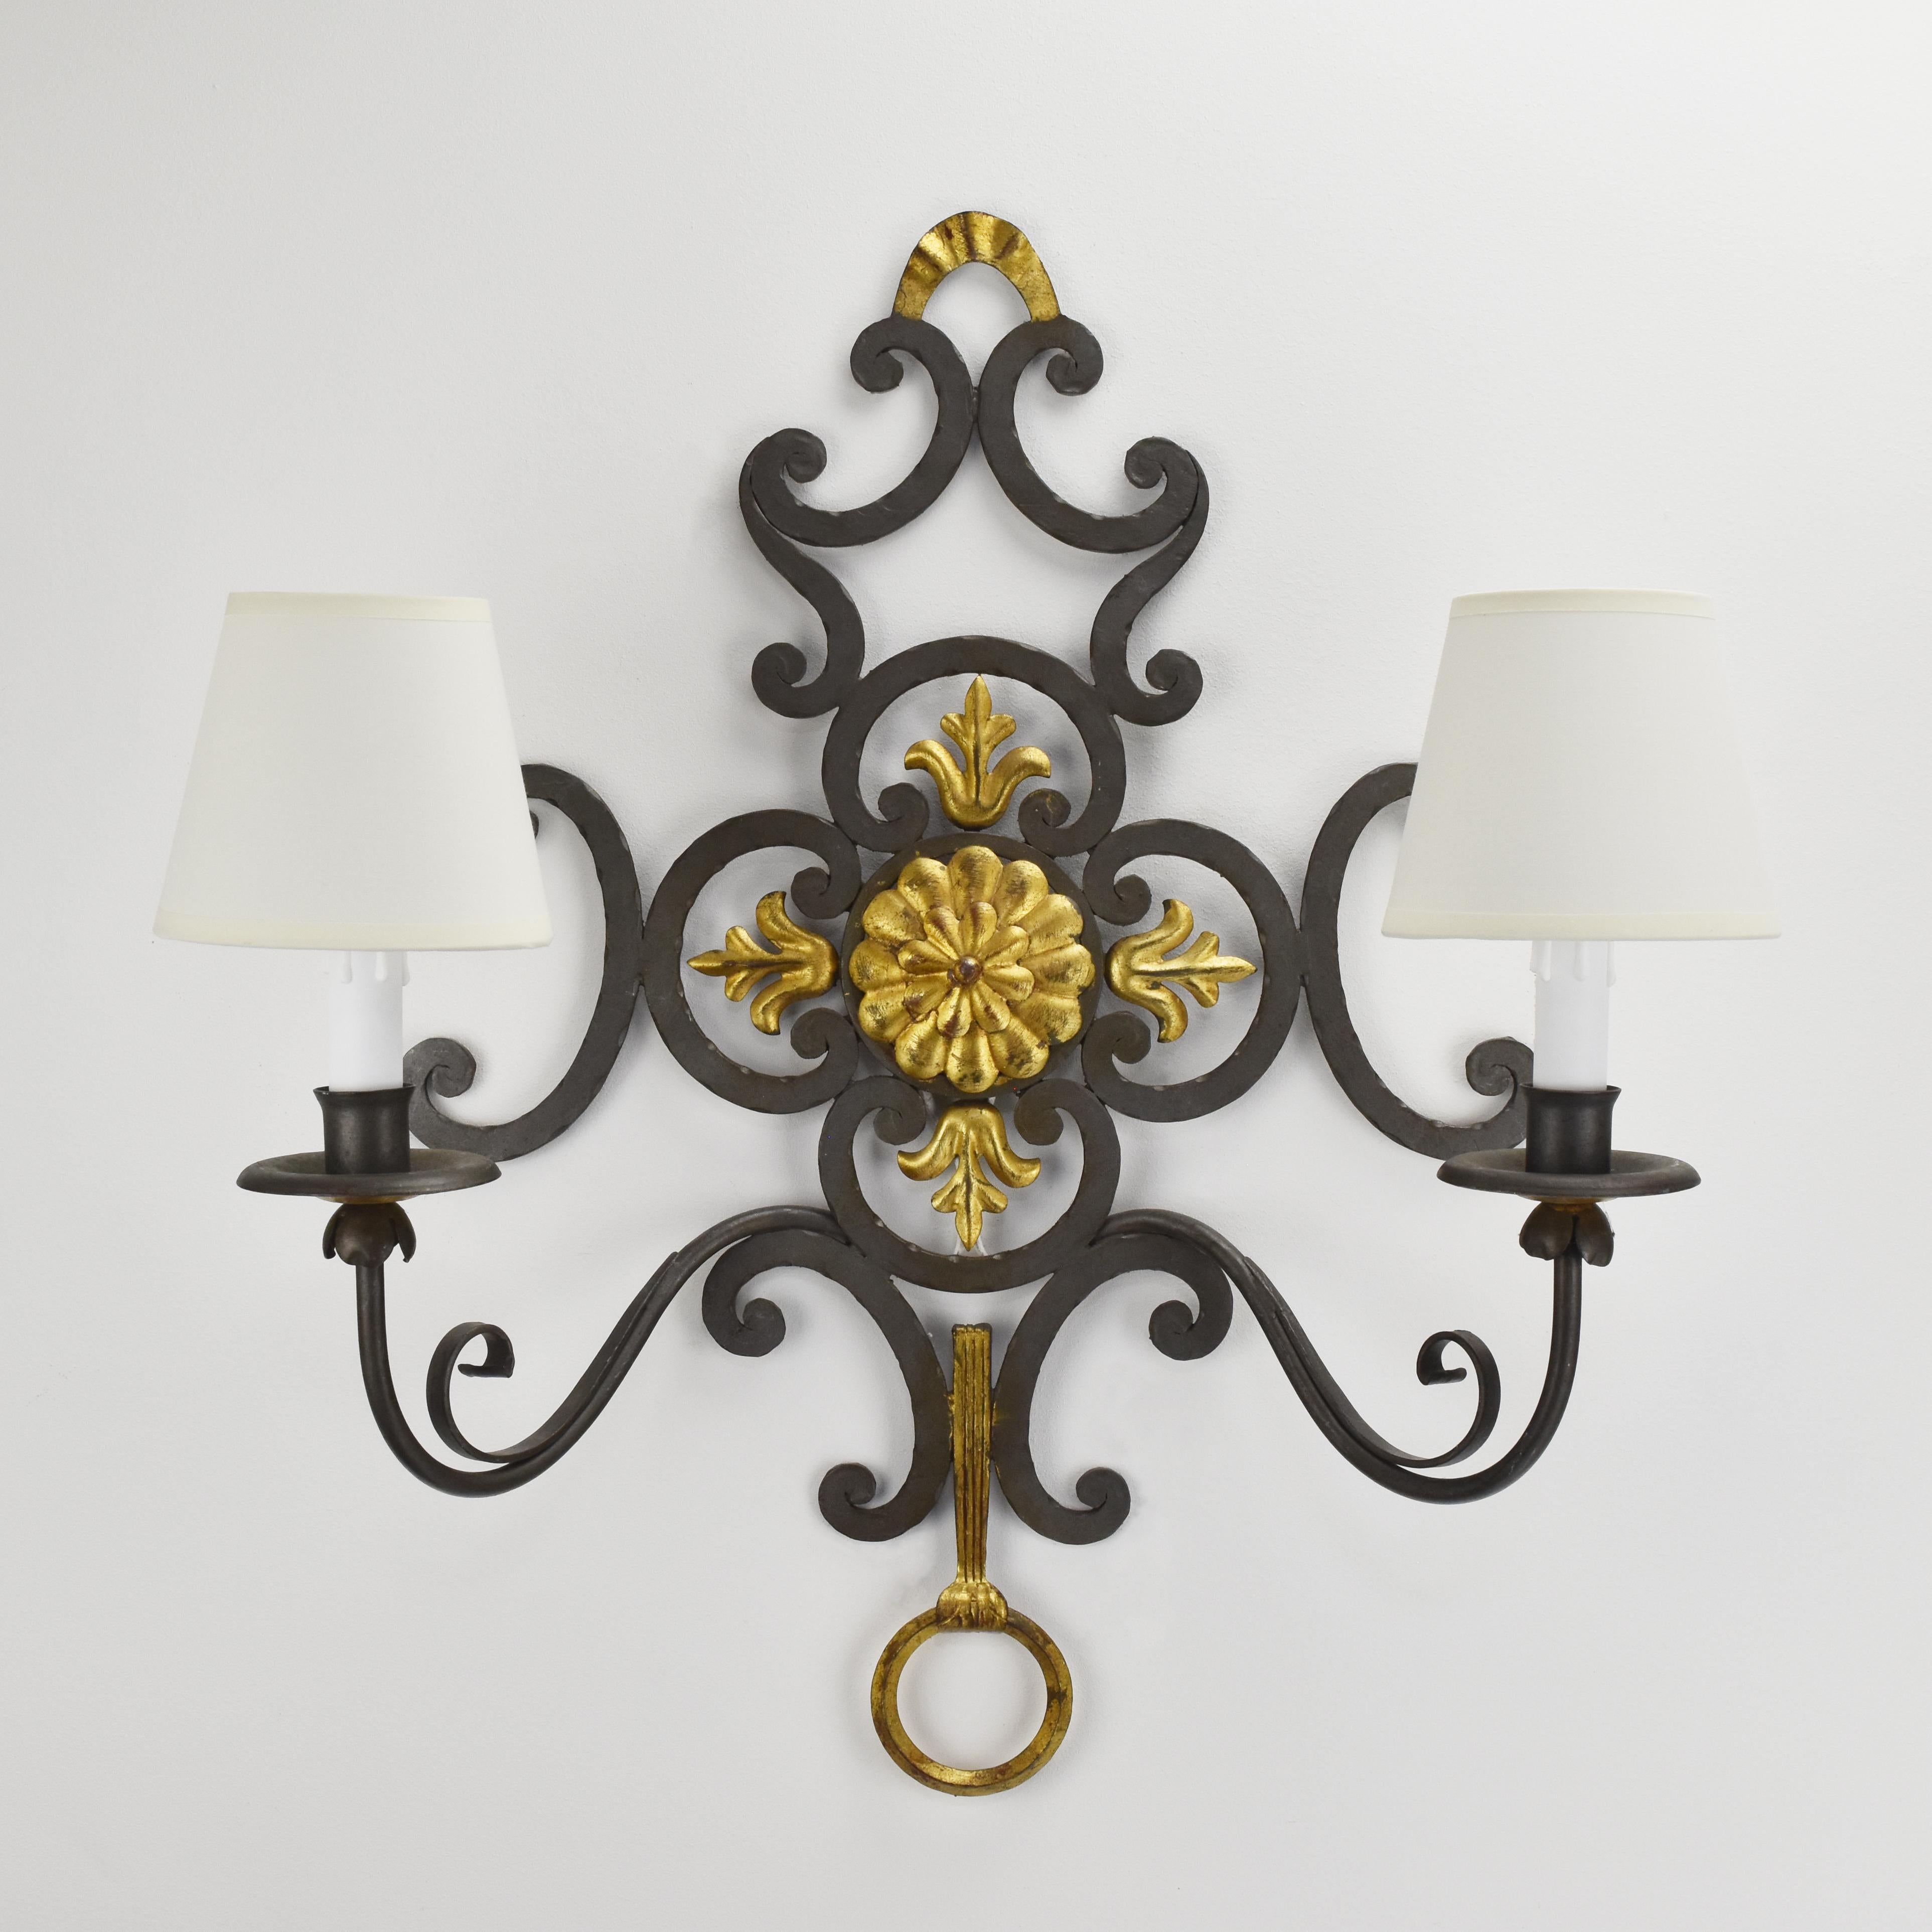 Vintage Pair of Large French Wrought Iron Wall Sconces Spanish Revival In Good Condition For Sale In Bad Säckingen, DE